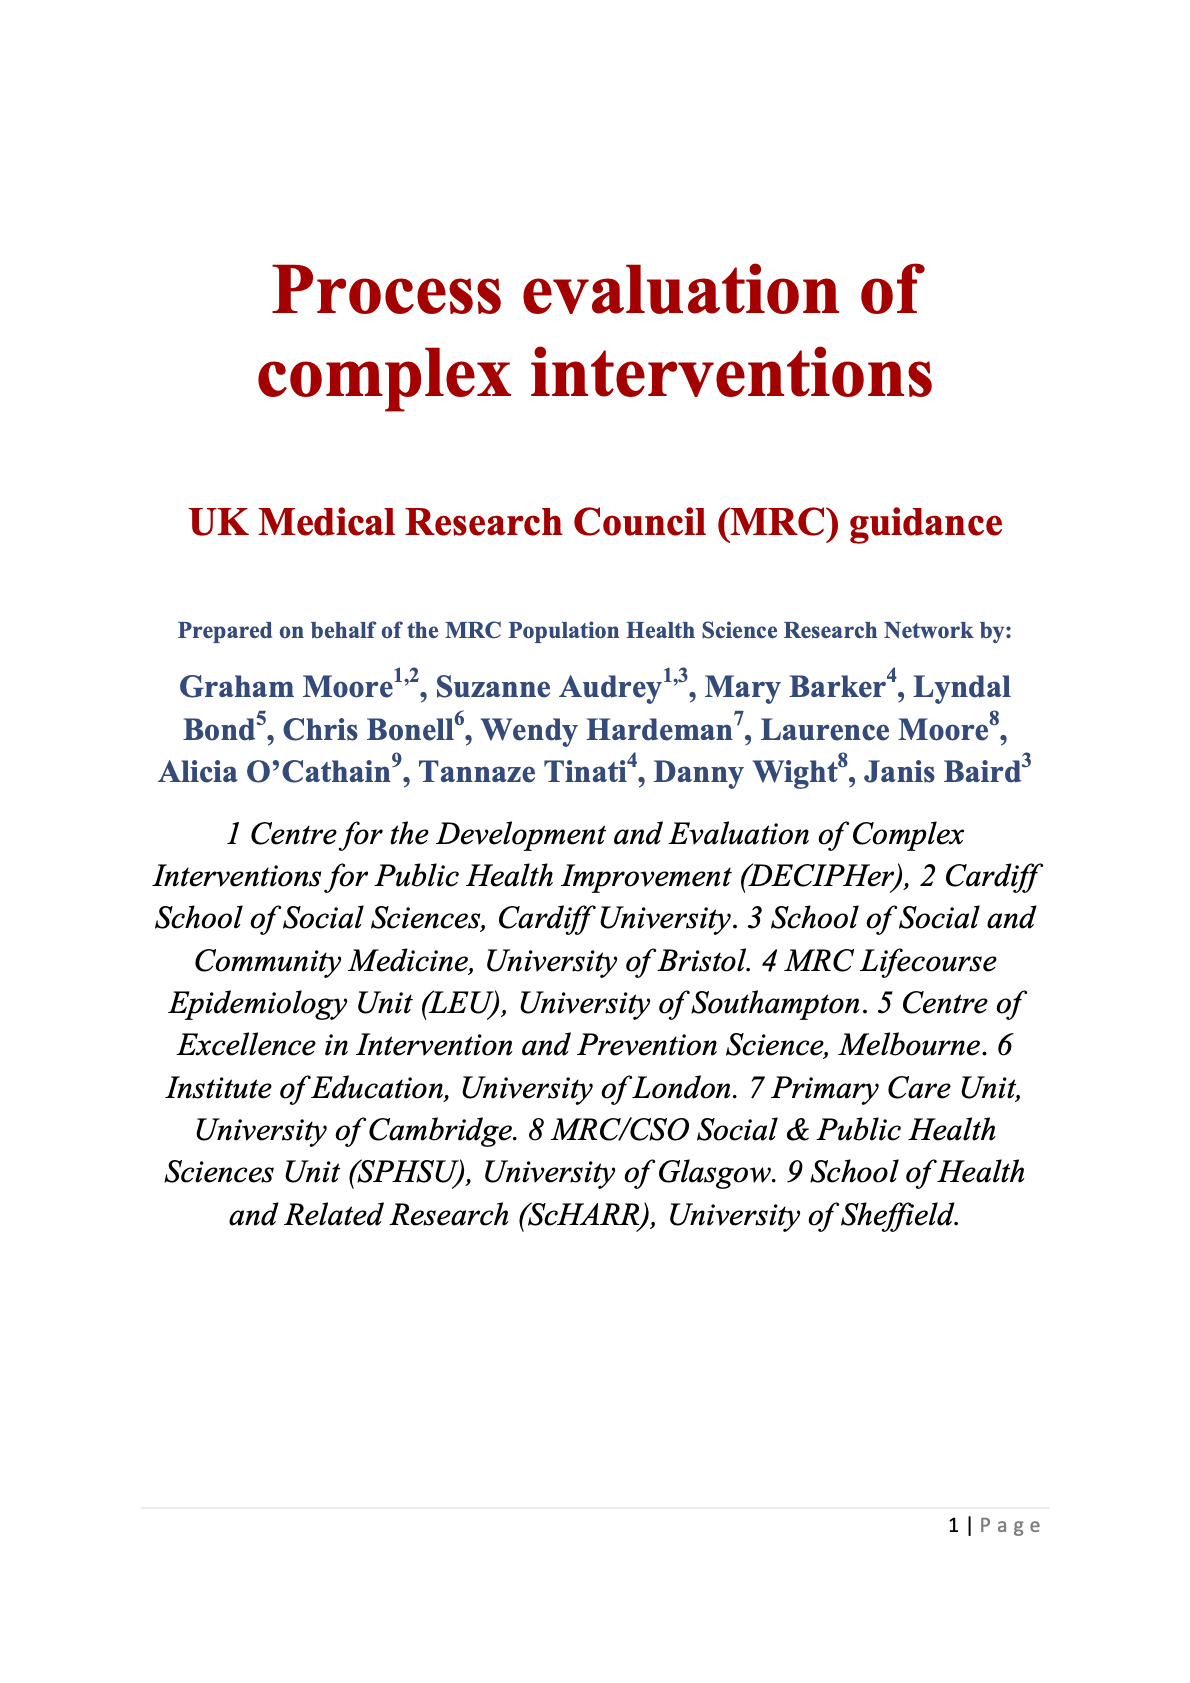 Process Evaluation of Complex Interventions